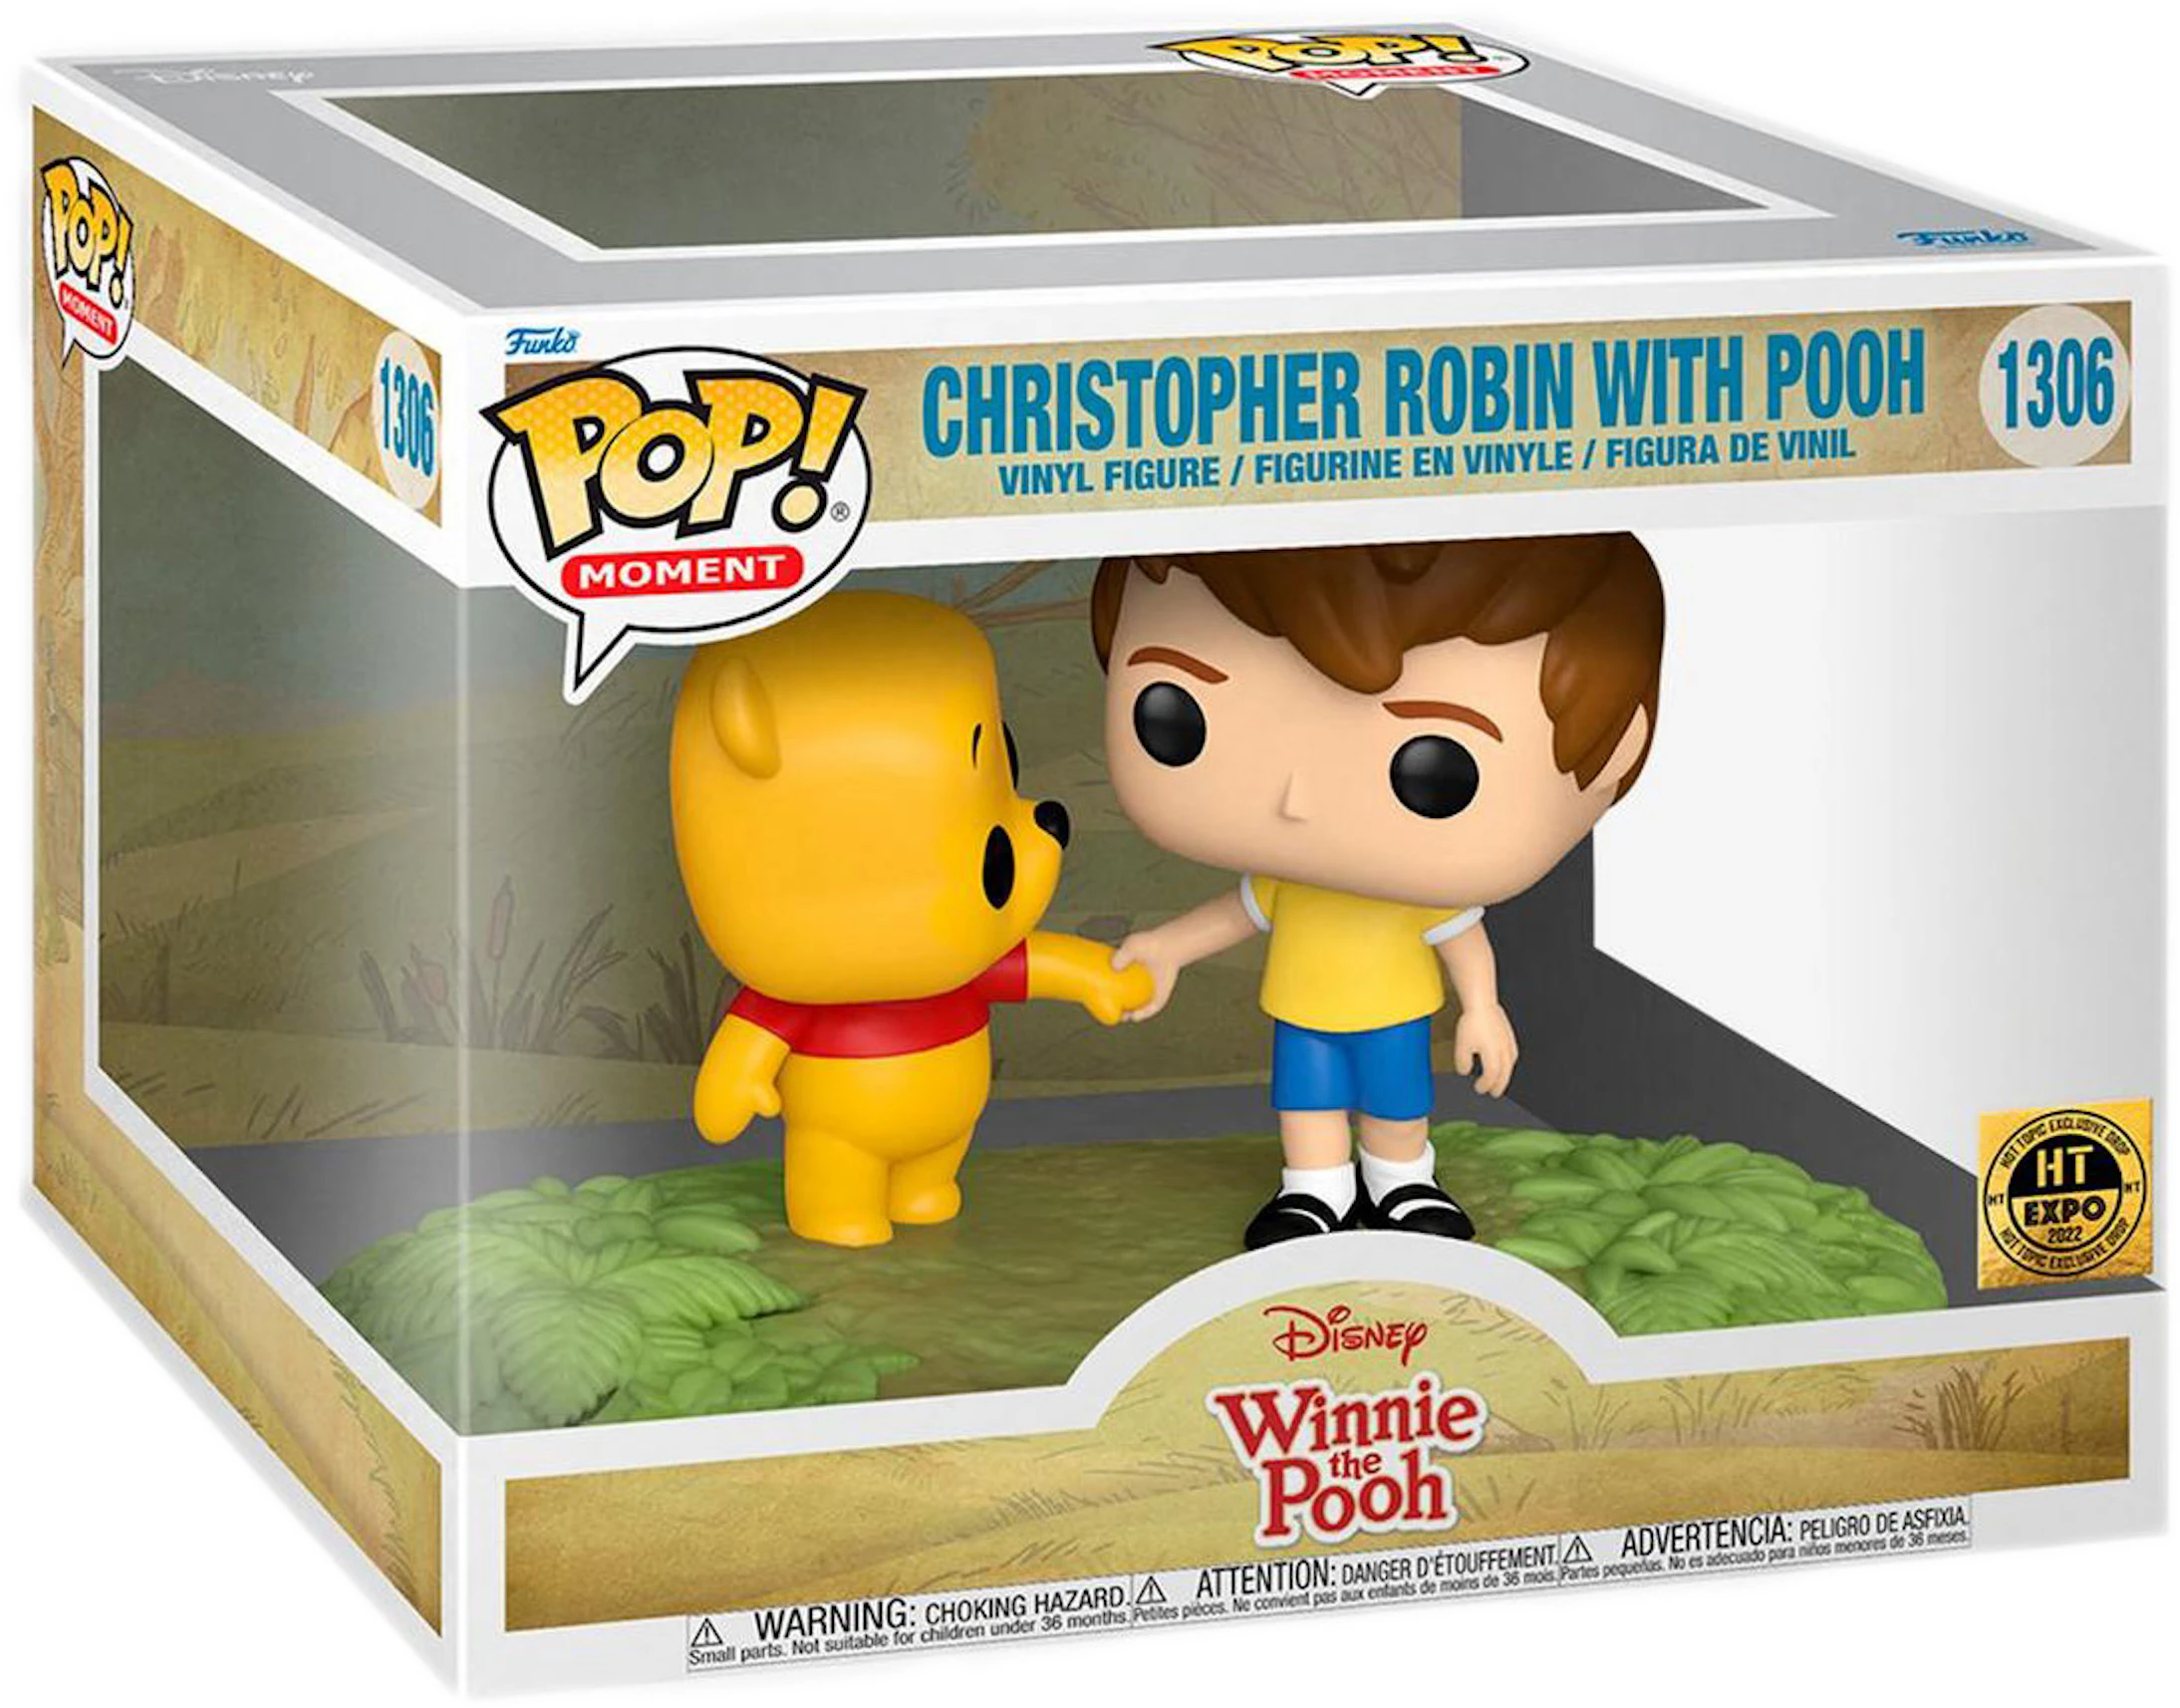 Funko Pop! Moment Disney Winnie the Pooh Christopher Robin with Pooh 2022  Hot Topic Expo Exclusive Figure #1306 - US